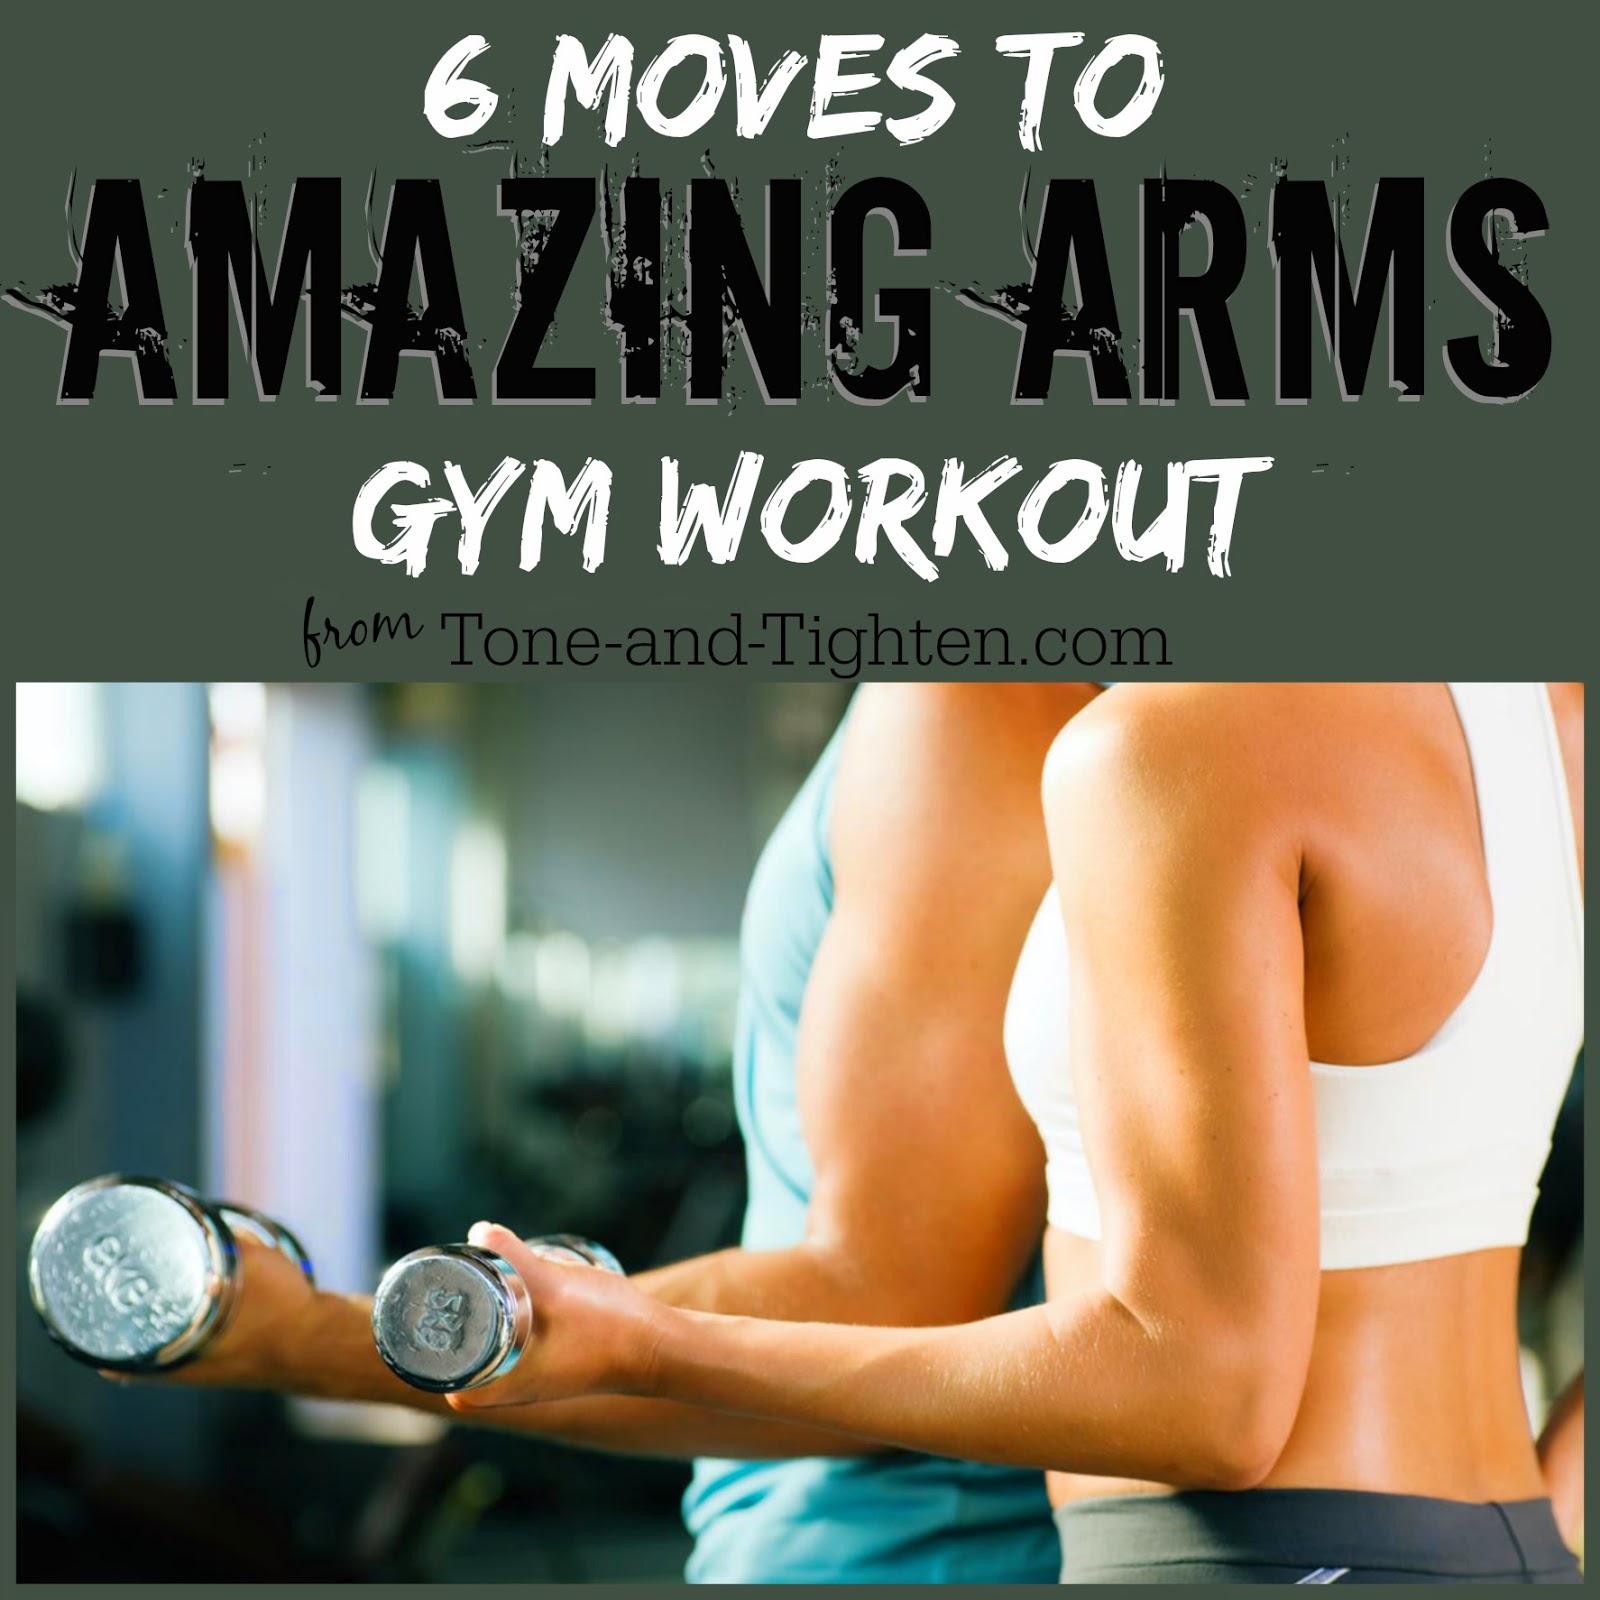 What I Worked Wednesday – Gym workout for your arms!